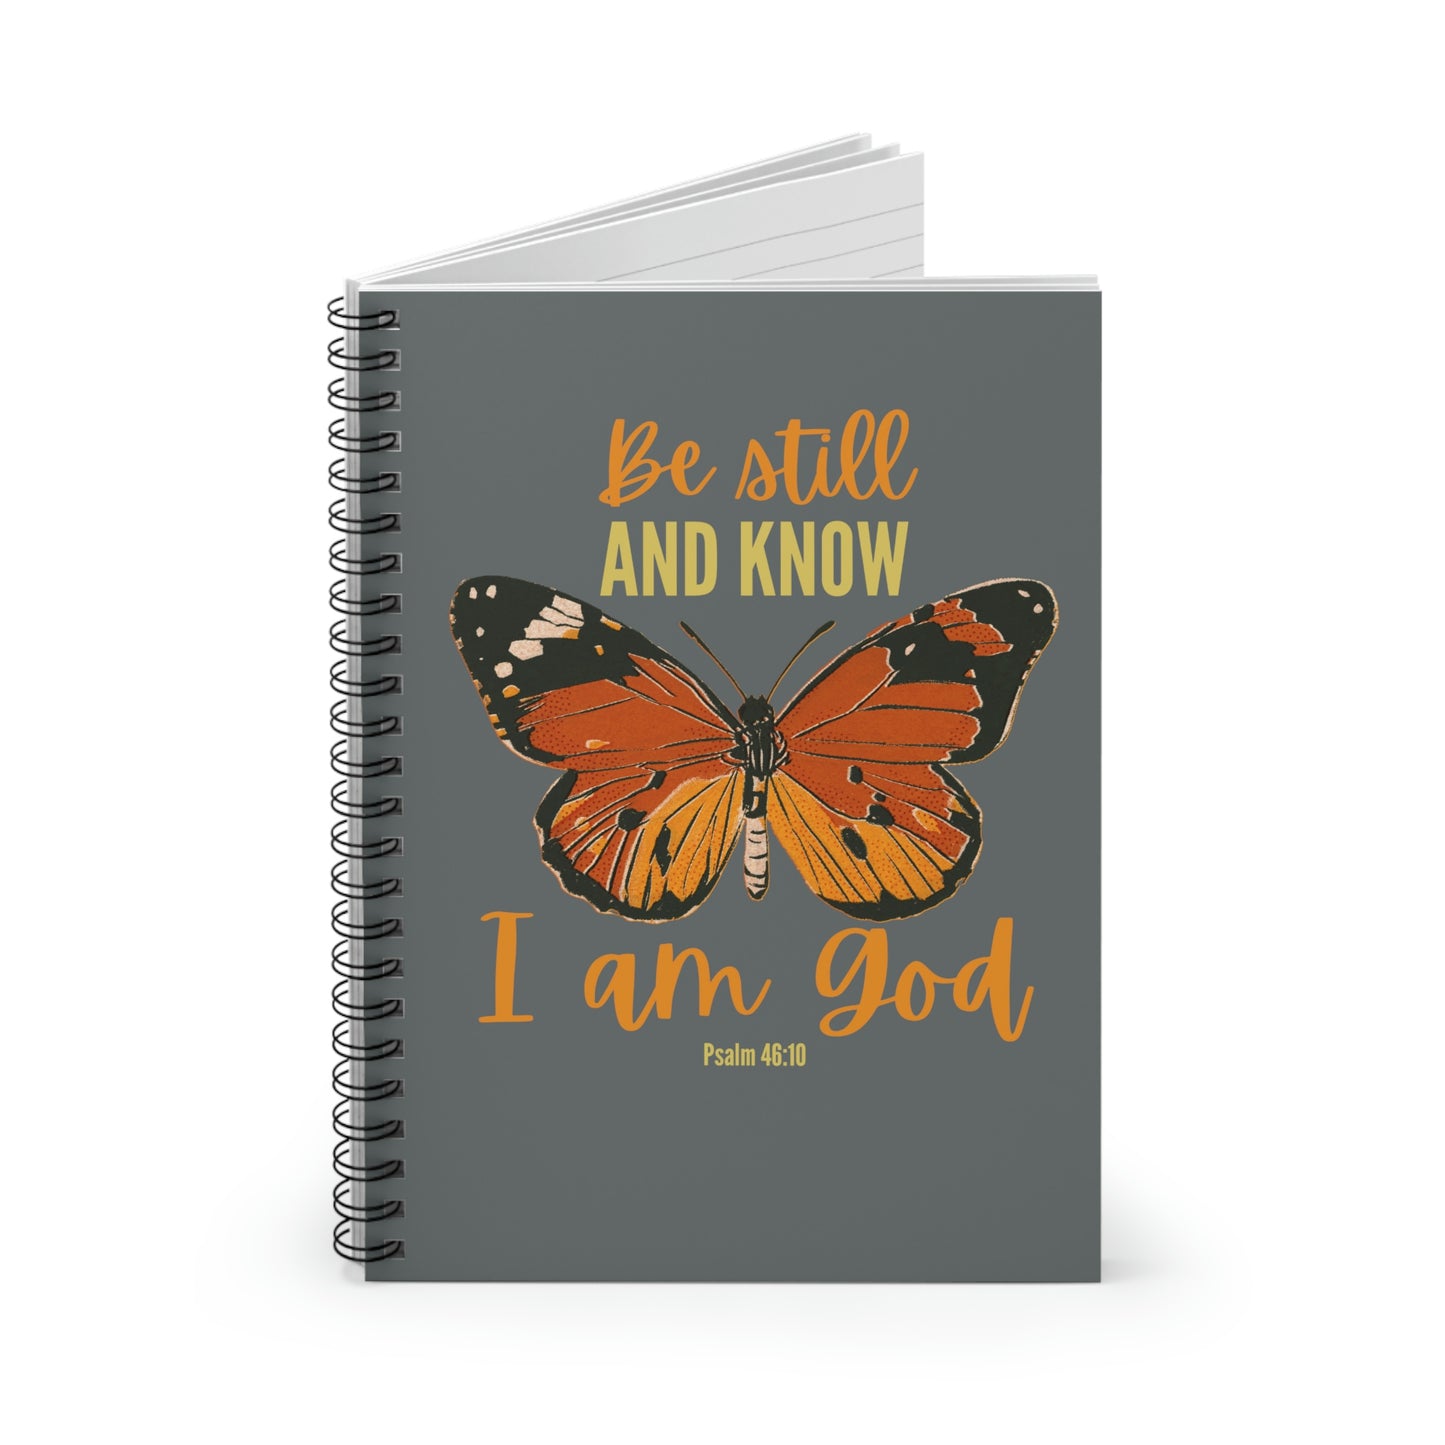 Psalm 46:10 Be Still And Know I am God, Blank Notebook, Prayer Journal, Bible Study Notebook, Faith Diary, Spiral Notebook - Ruled Line